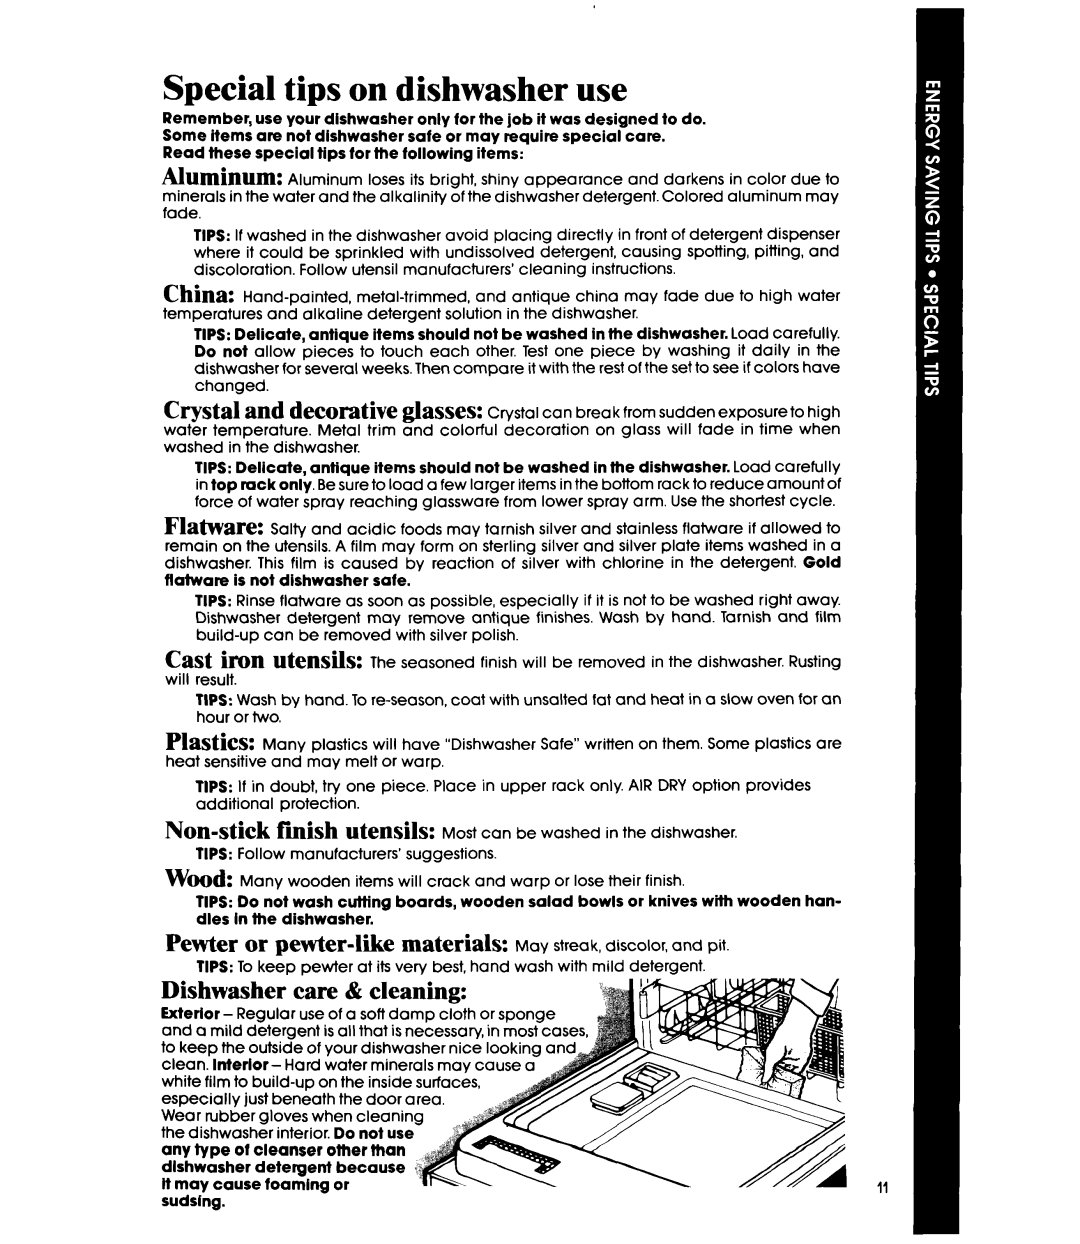 Whirlpool DU2016XS, DU2000XS manual Special tips on dishwasher use, Dishwasher care & cleakg 